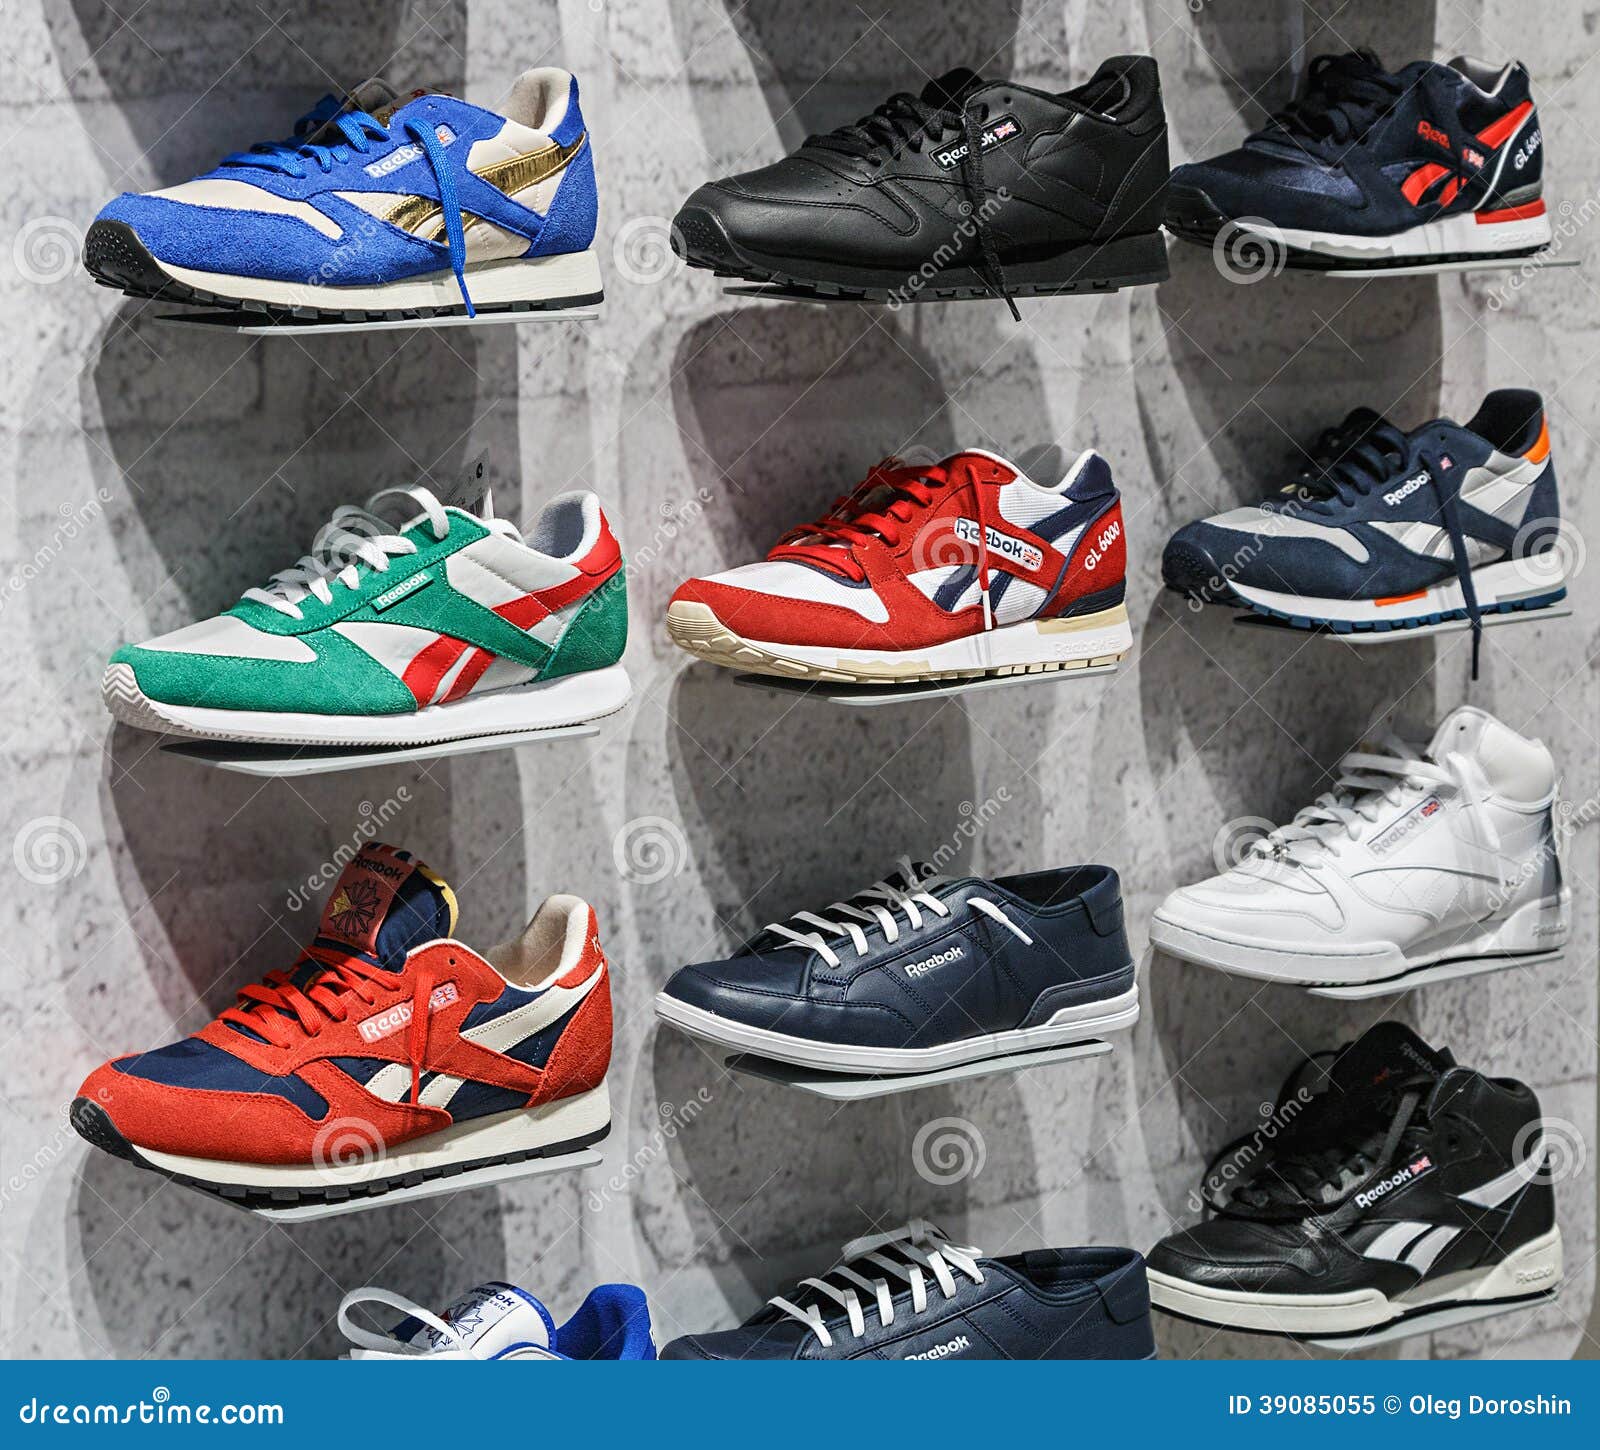 Reebok Sports Shop in Moscow Editorial Image - Image of shoe, sell ...